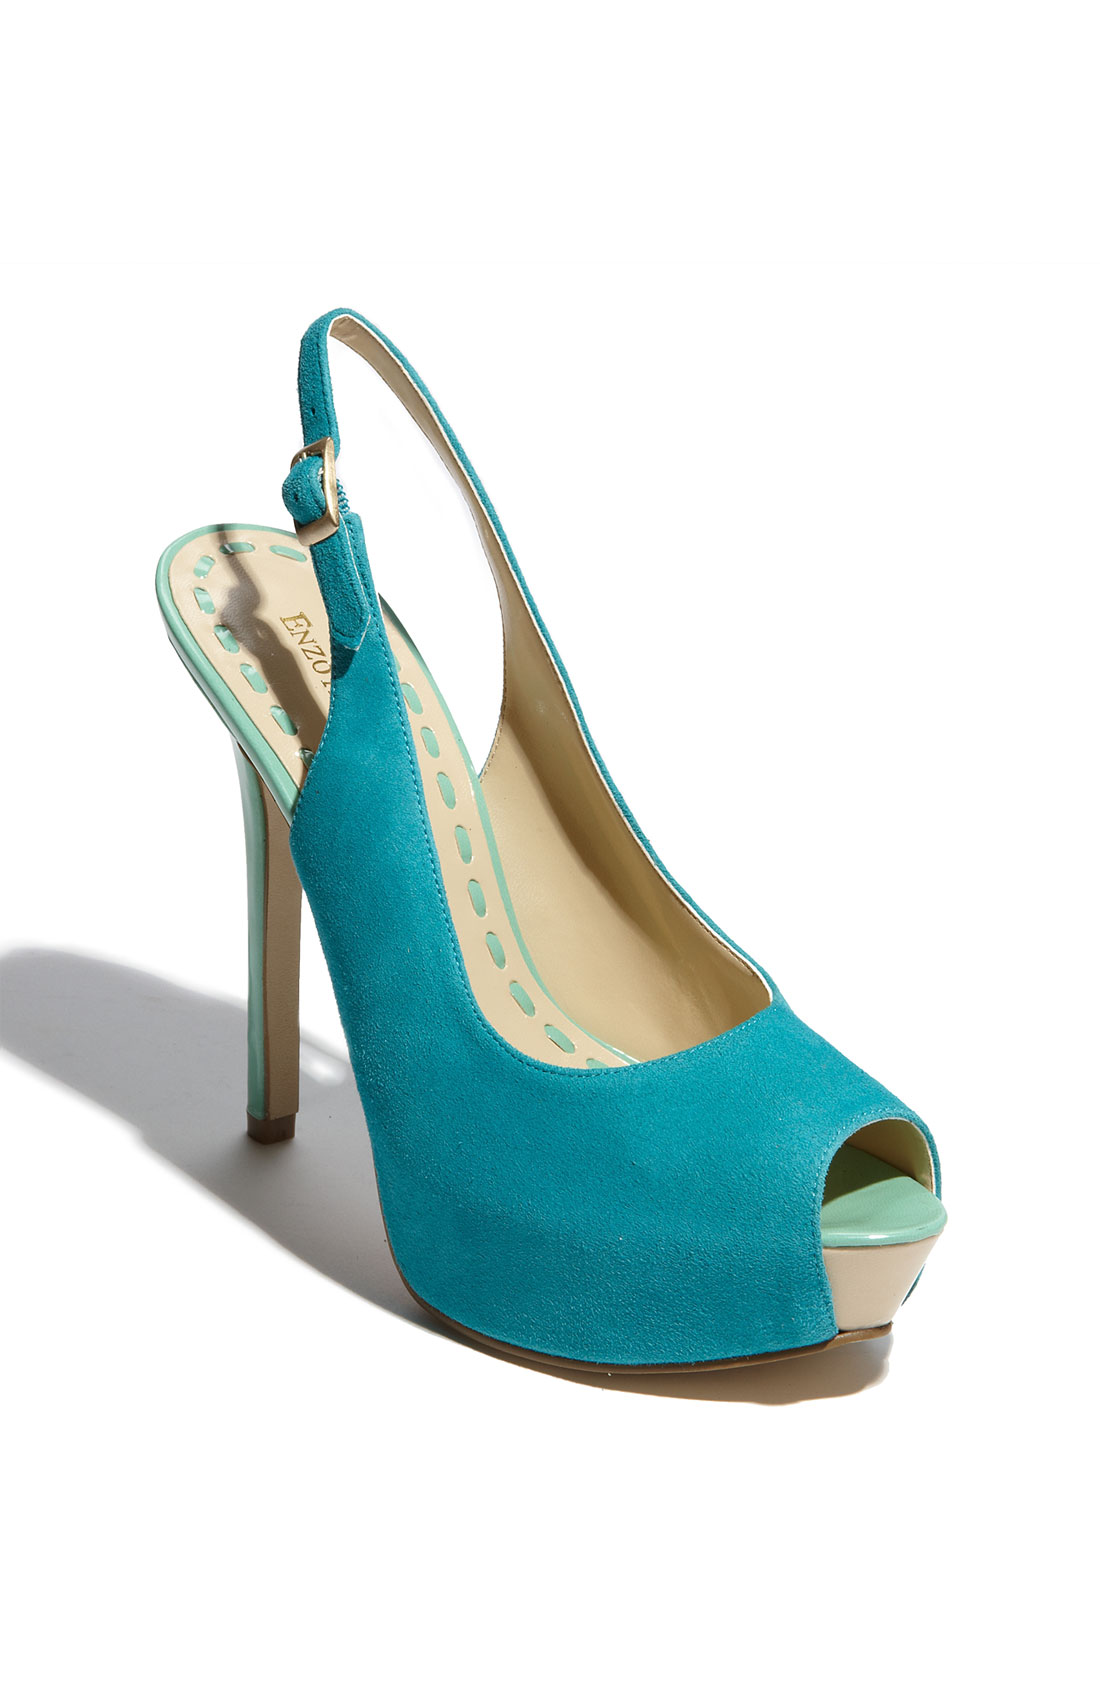 Enzo Angiolini Tolten Slingback Pump in Blue (teal suede) | Lyst